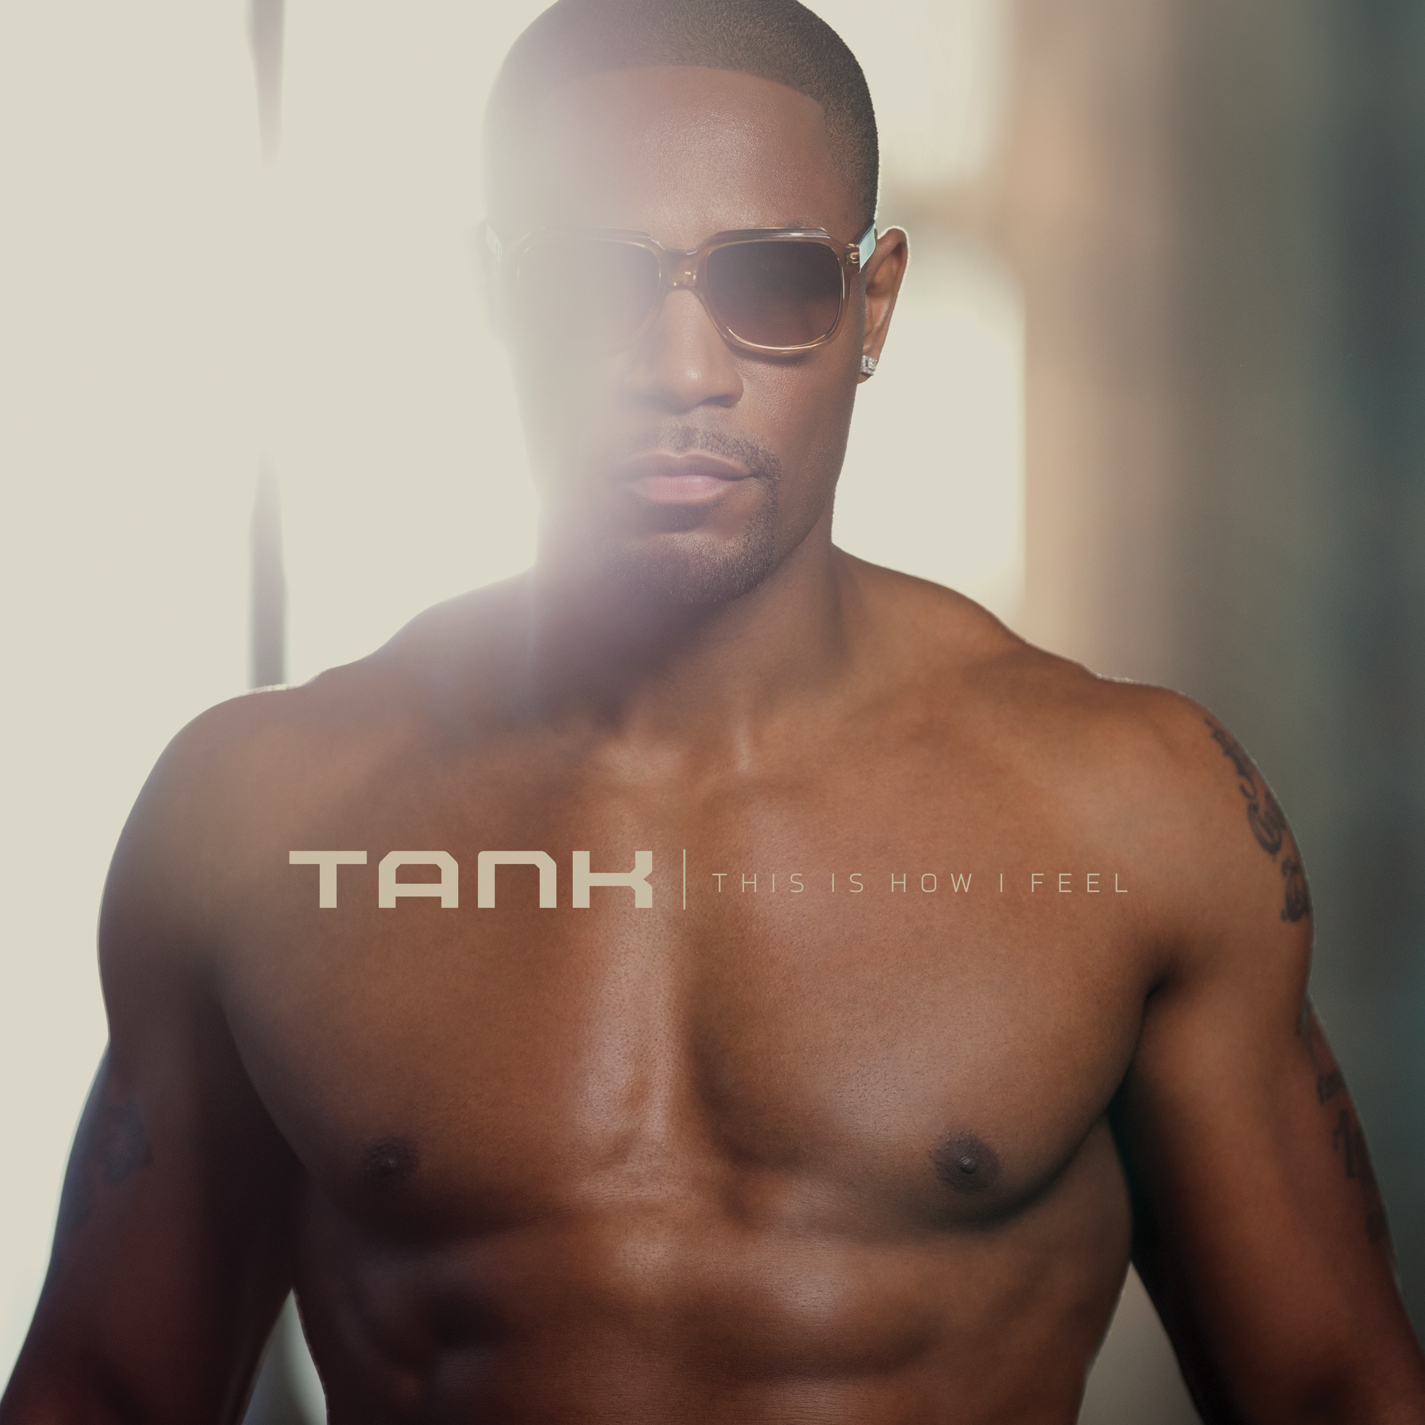 Tank "This Is How I Feel" (Album Preview)